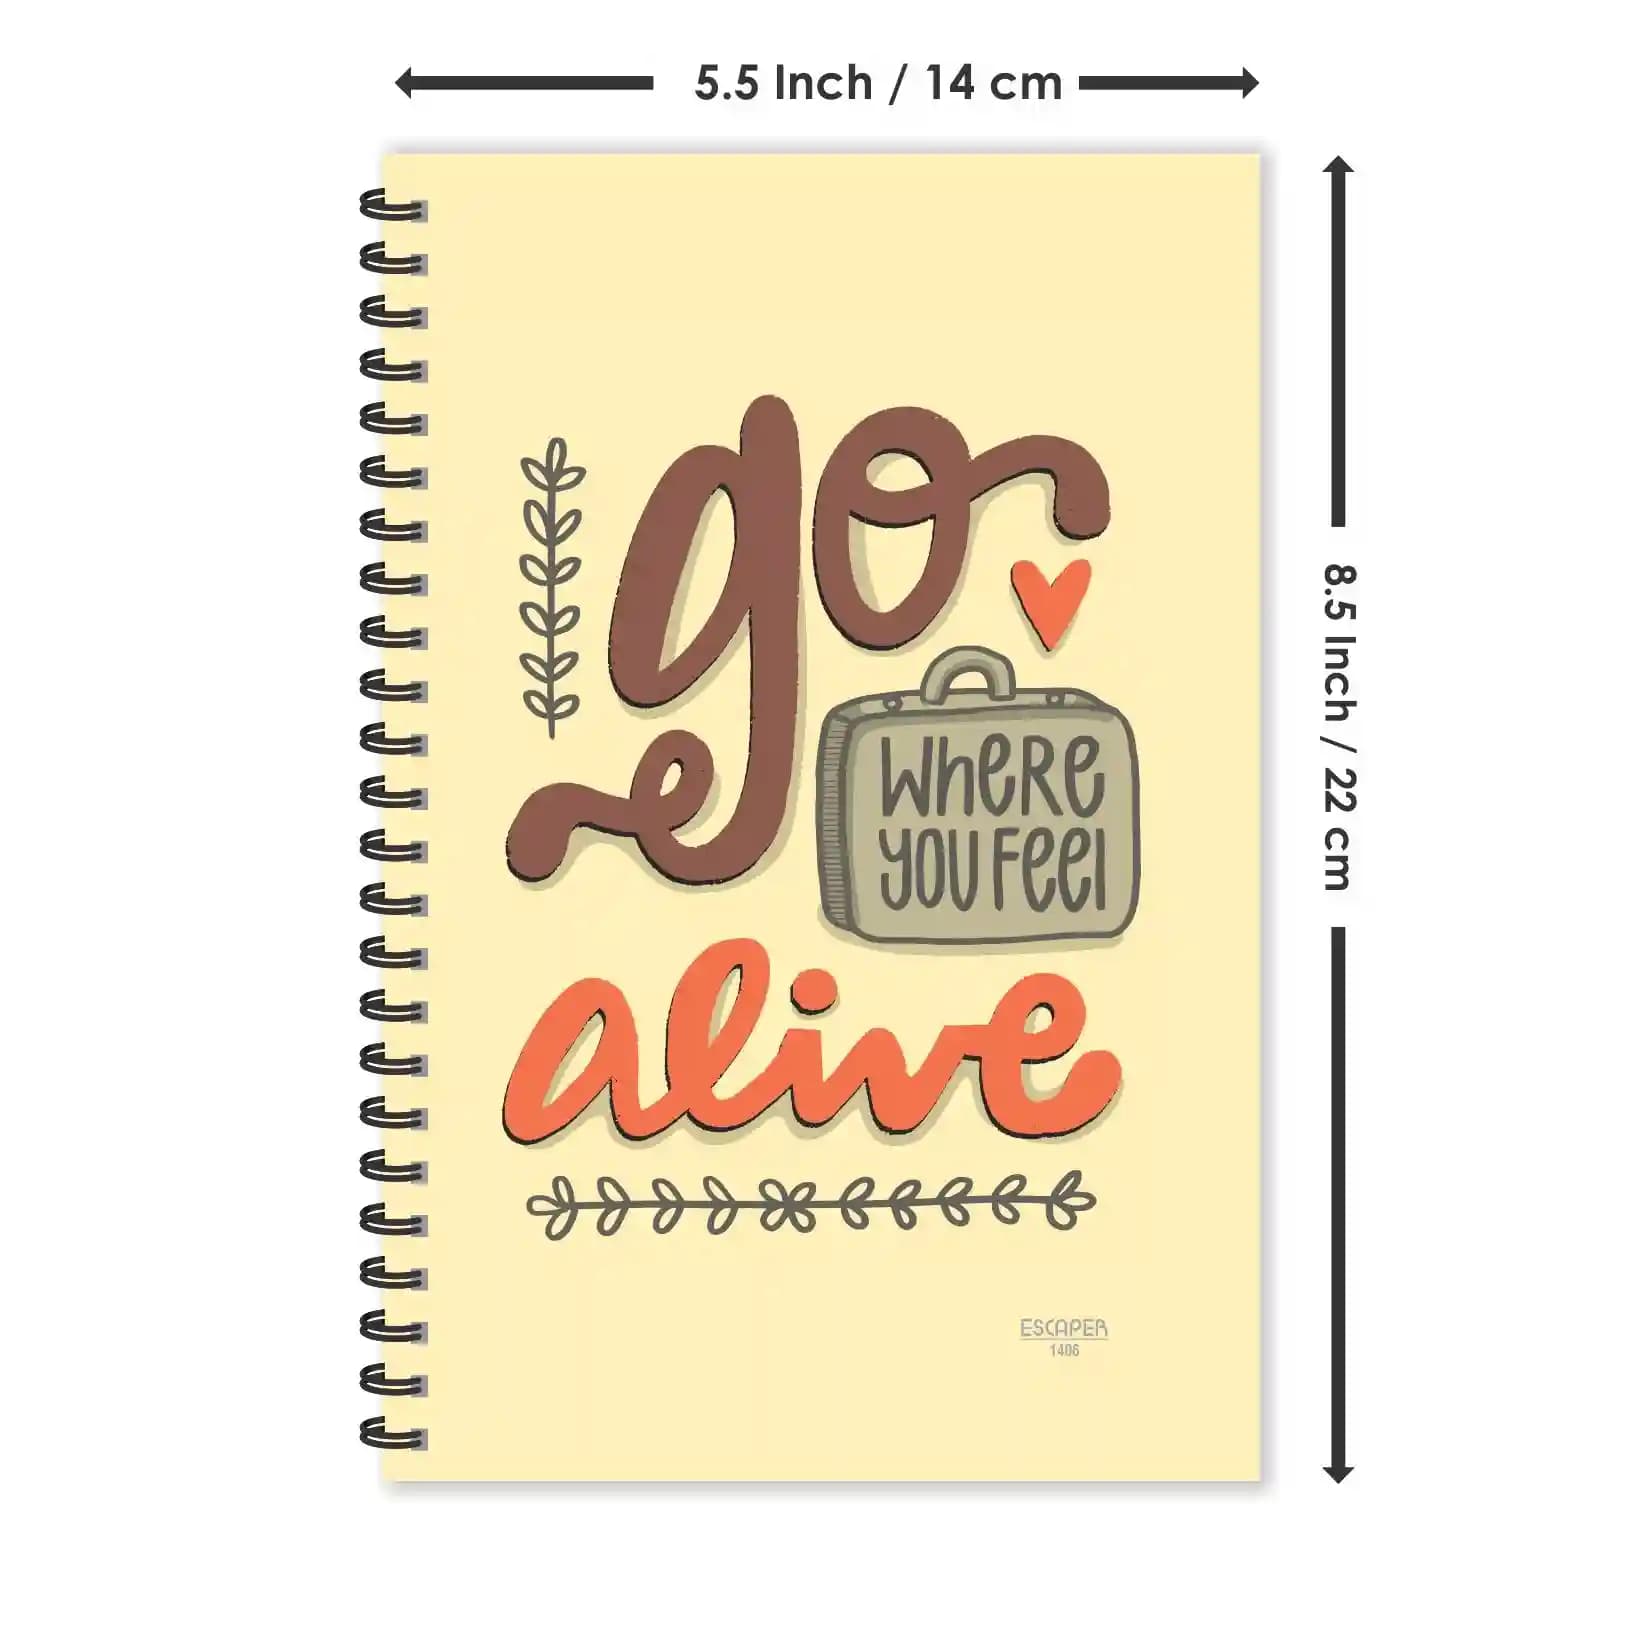 Go Where You Feel Alive Diaries Ruled - Pack Of 3